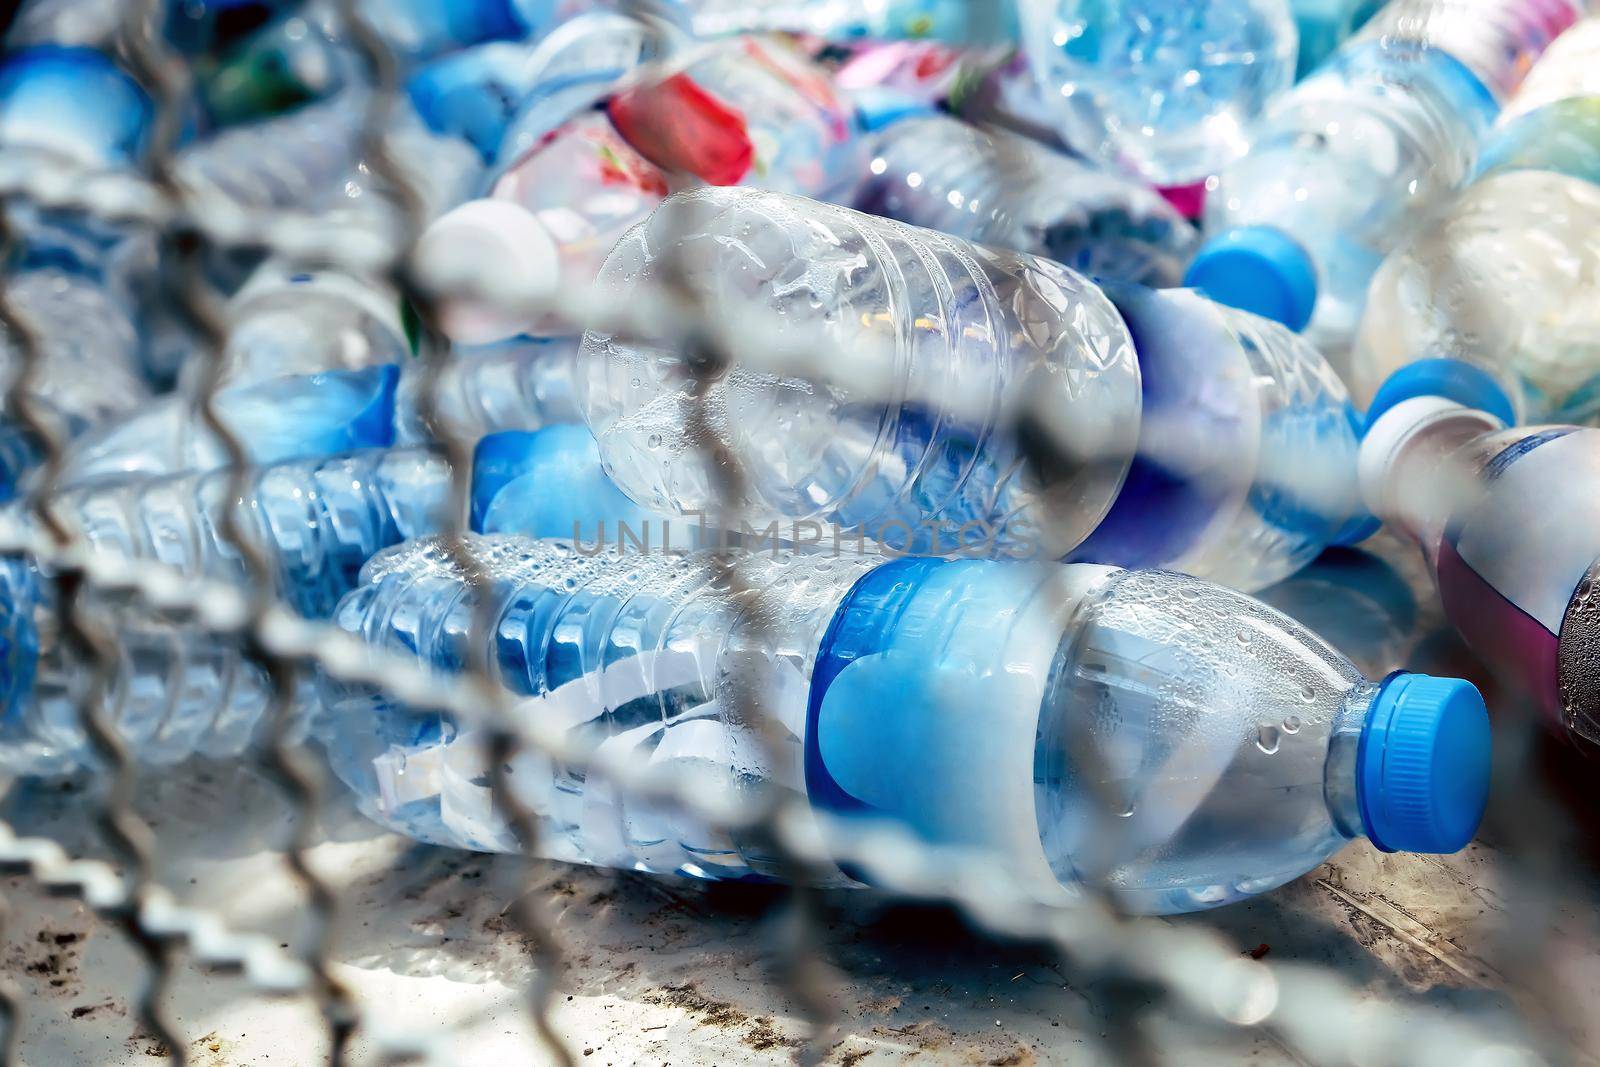 Plastic bottles and containers prepared for recycling by ponsulak